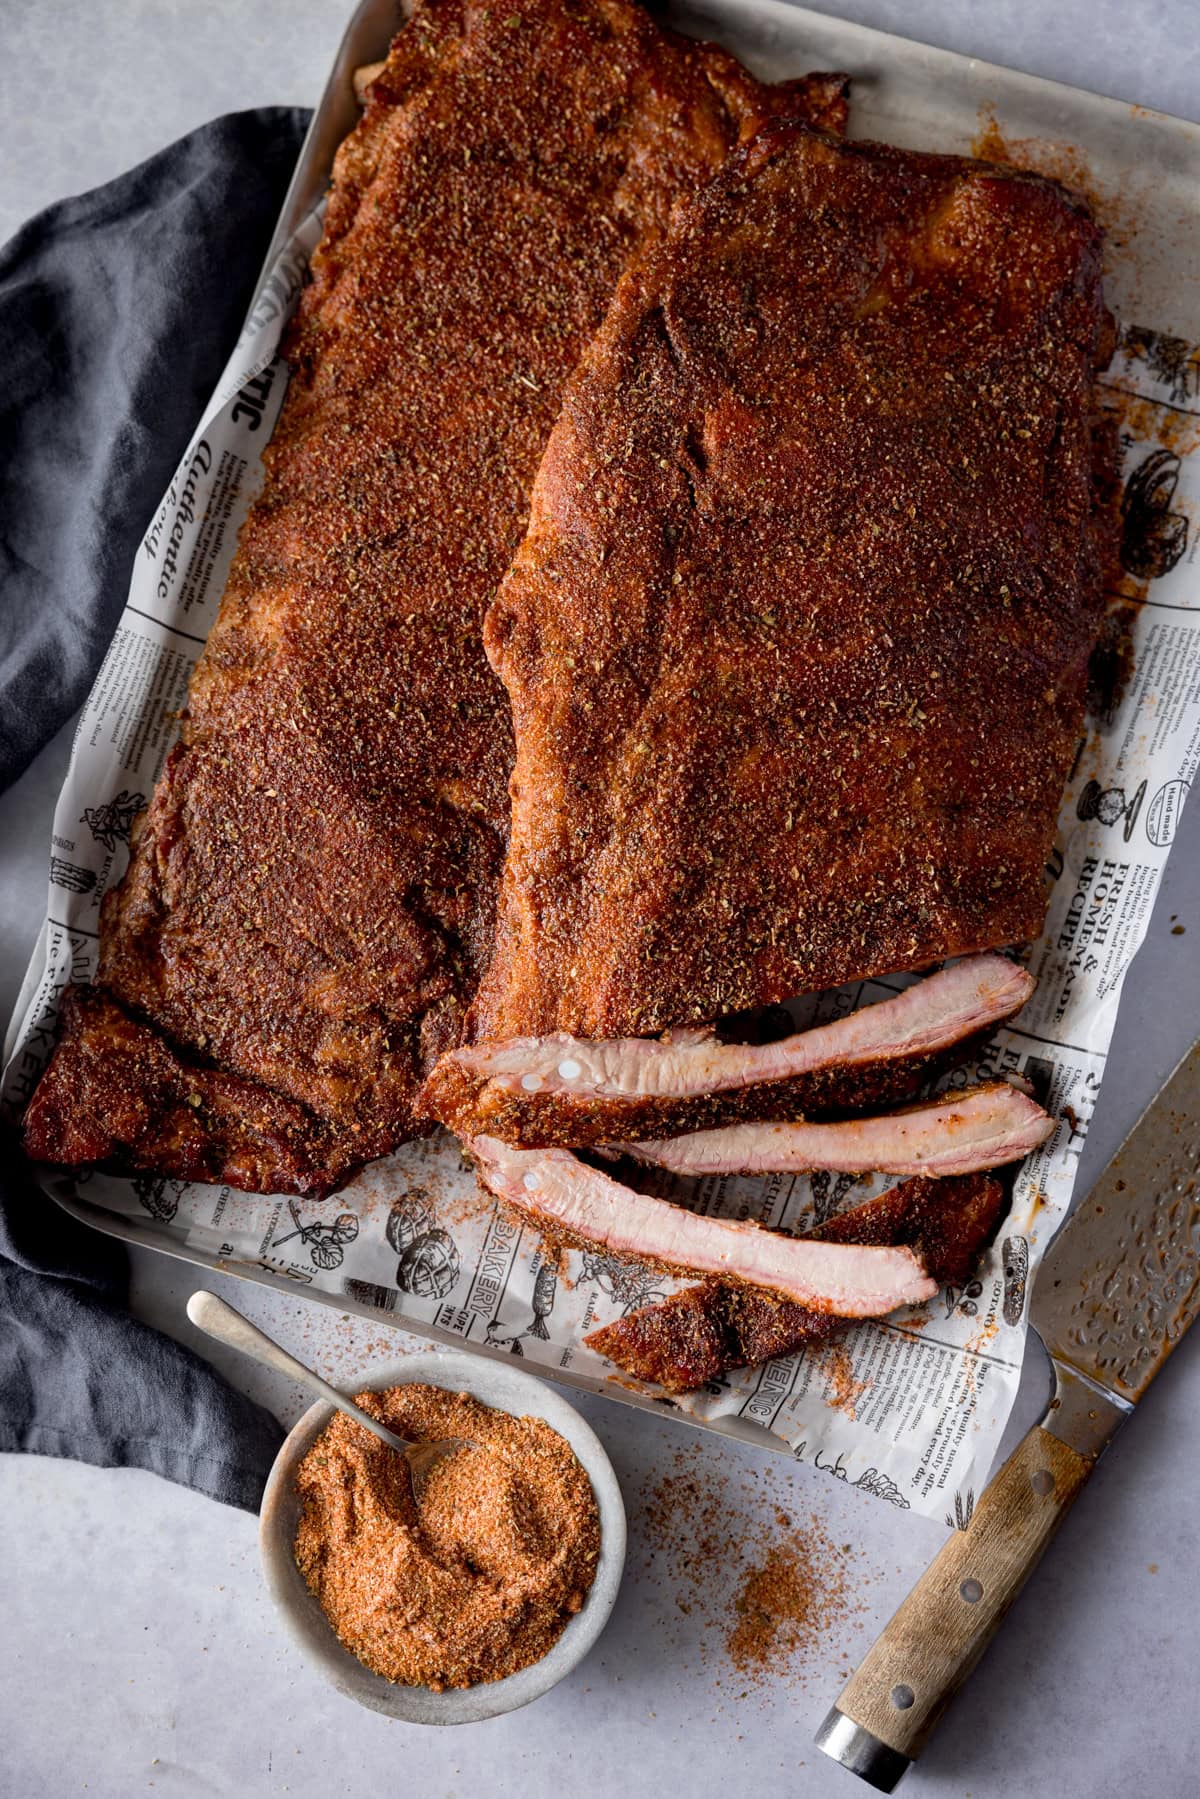 A tall, overhead image of dry rub BBQ ribs, there are two racks of the ribs laid out on a silver tray that is lined with newspaper. The central rack of ribs is cut into and the three of the ribs are separated so you can see the ribs. On the bottom left of the background, you can see a slate grey napkin tucked underneath the tray, in the bottom centre there is the dry rub seasoning in a light grey bowl with a silver teaspoon sticking out of it. On the bottom right of the image, there is a large silver knife with a wooden handle set at an angle. This is all set on a light grey background.